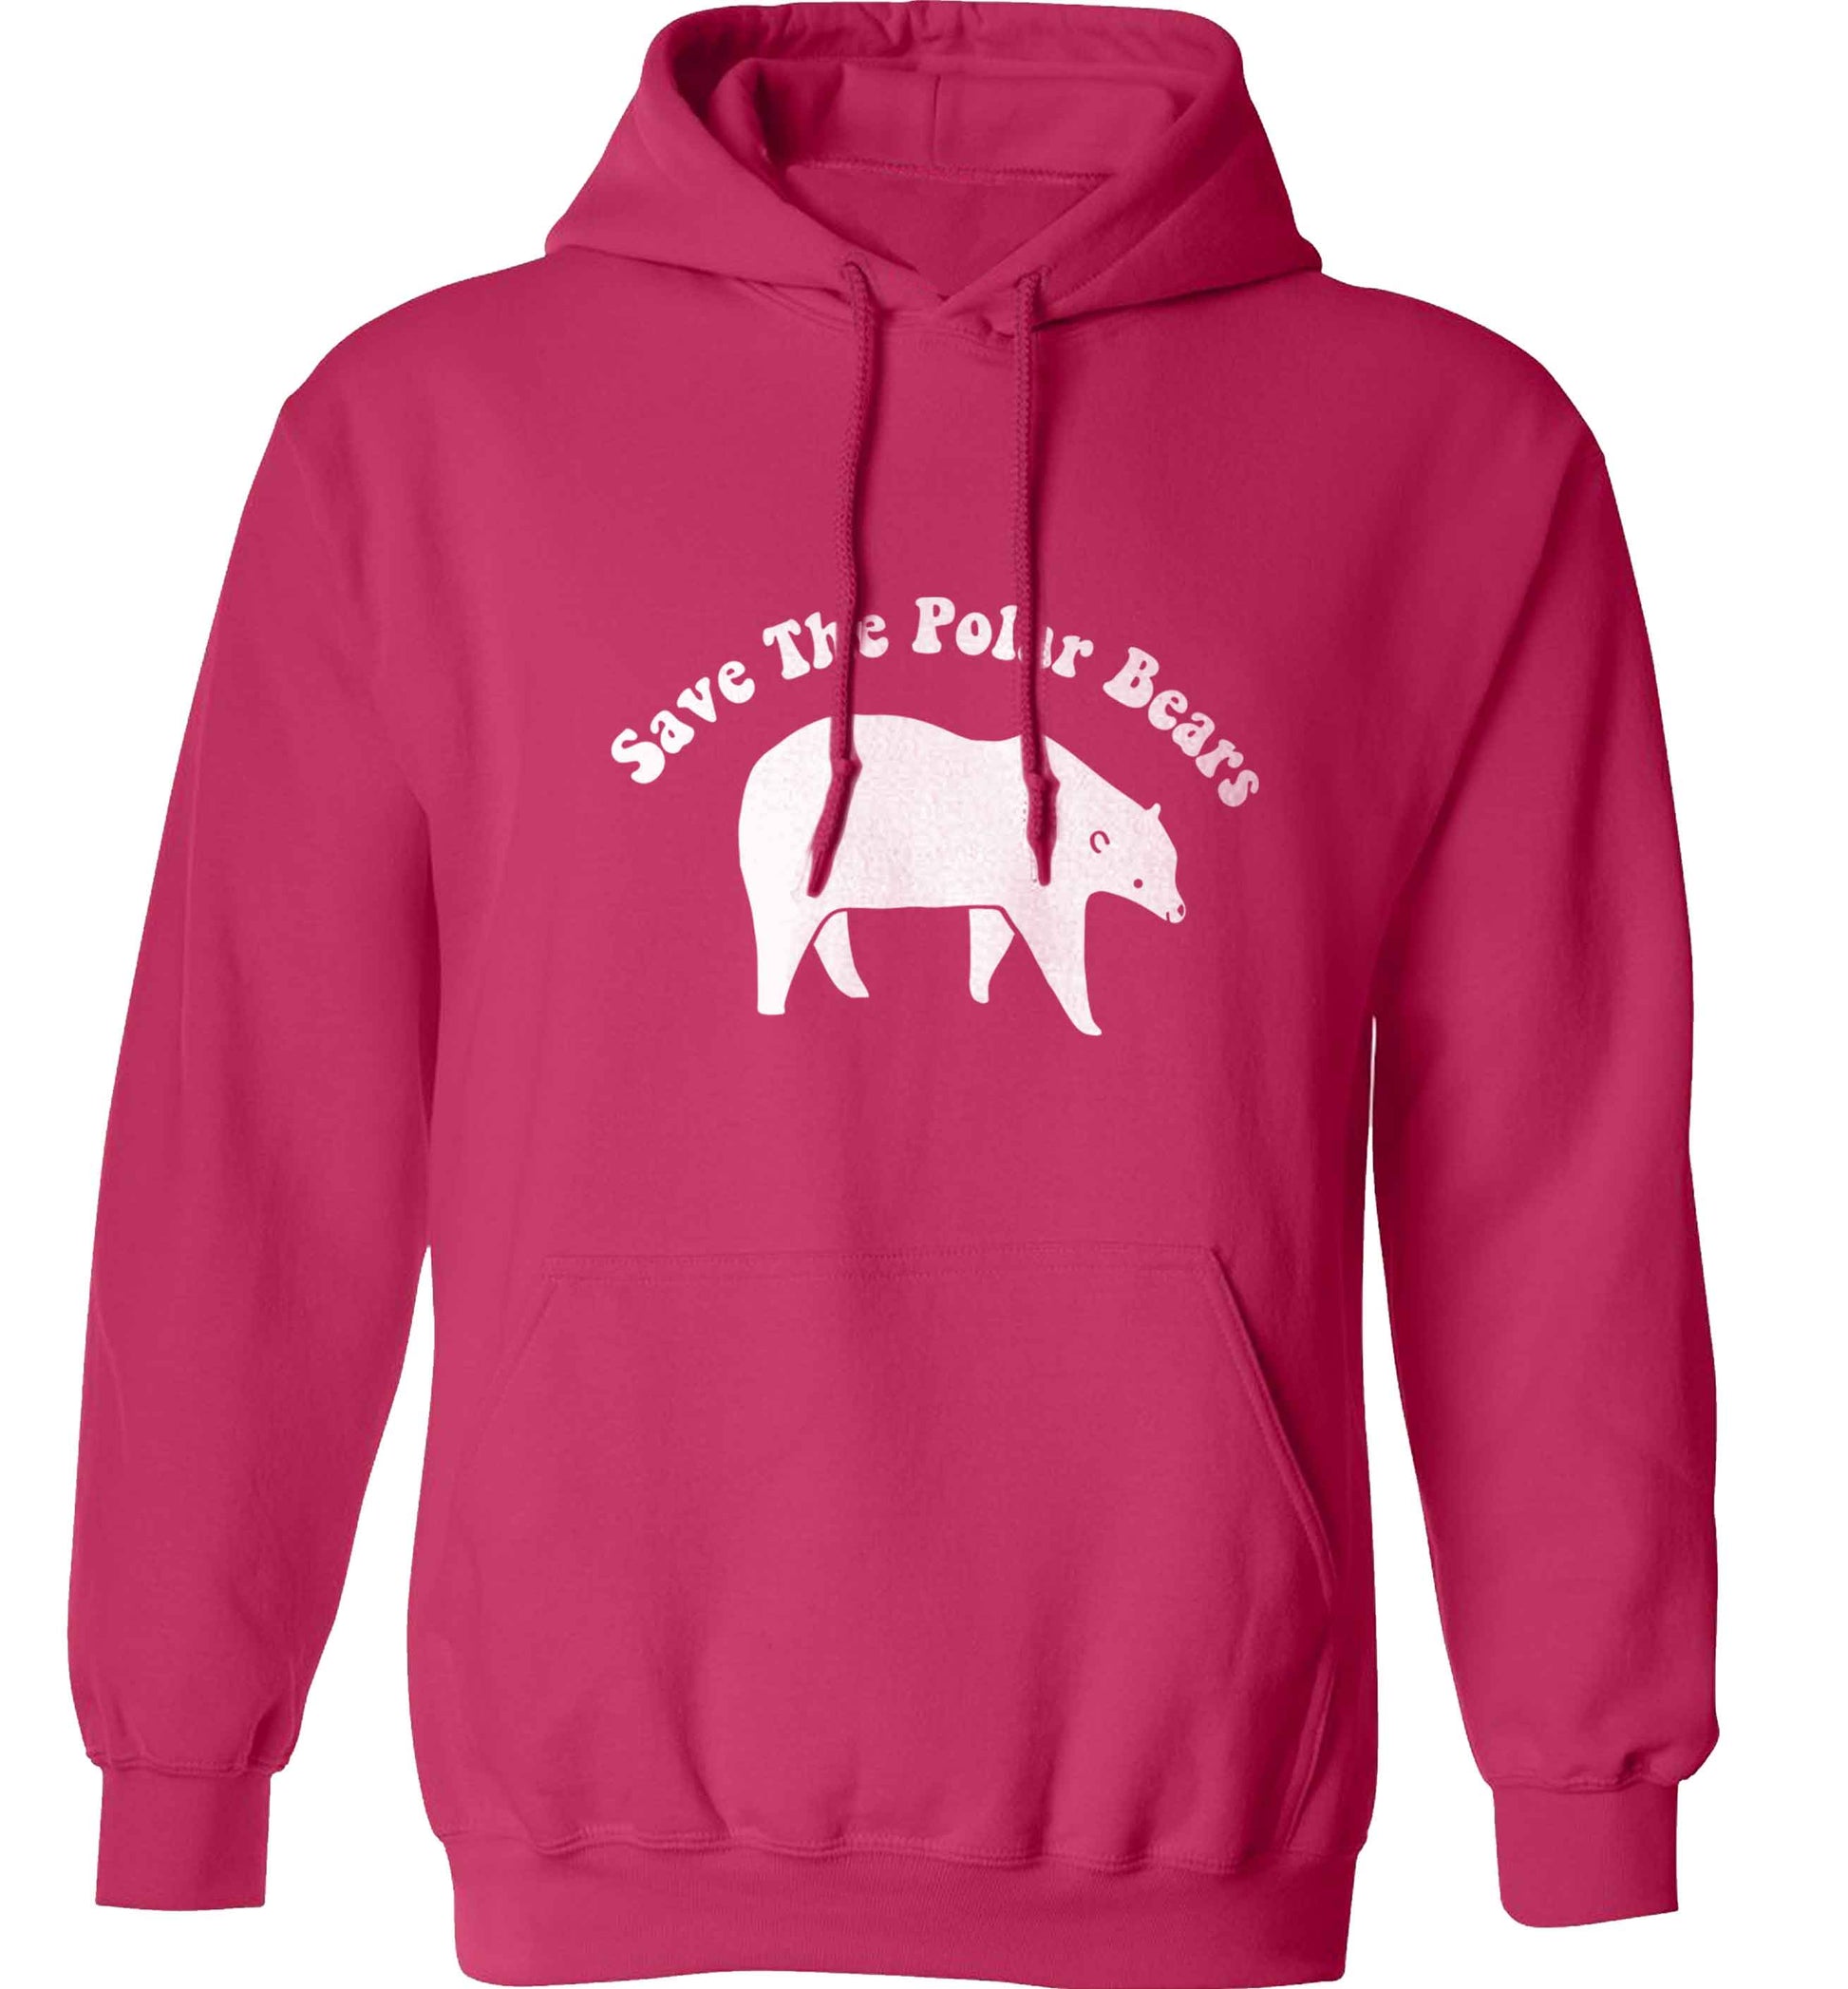 Save The Polar Bears adults unisex pink hoodie 2XL